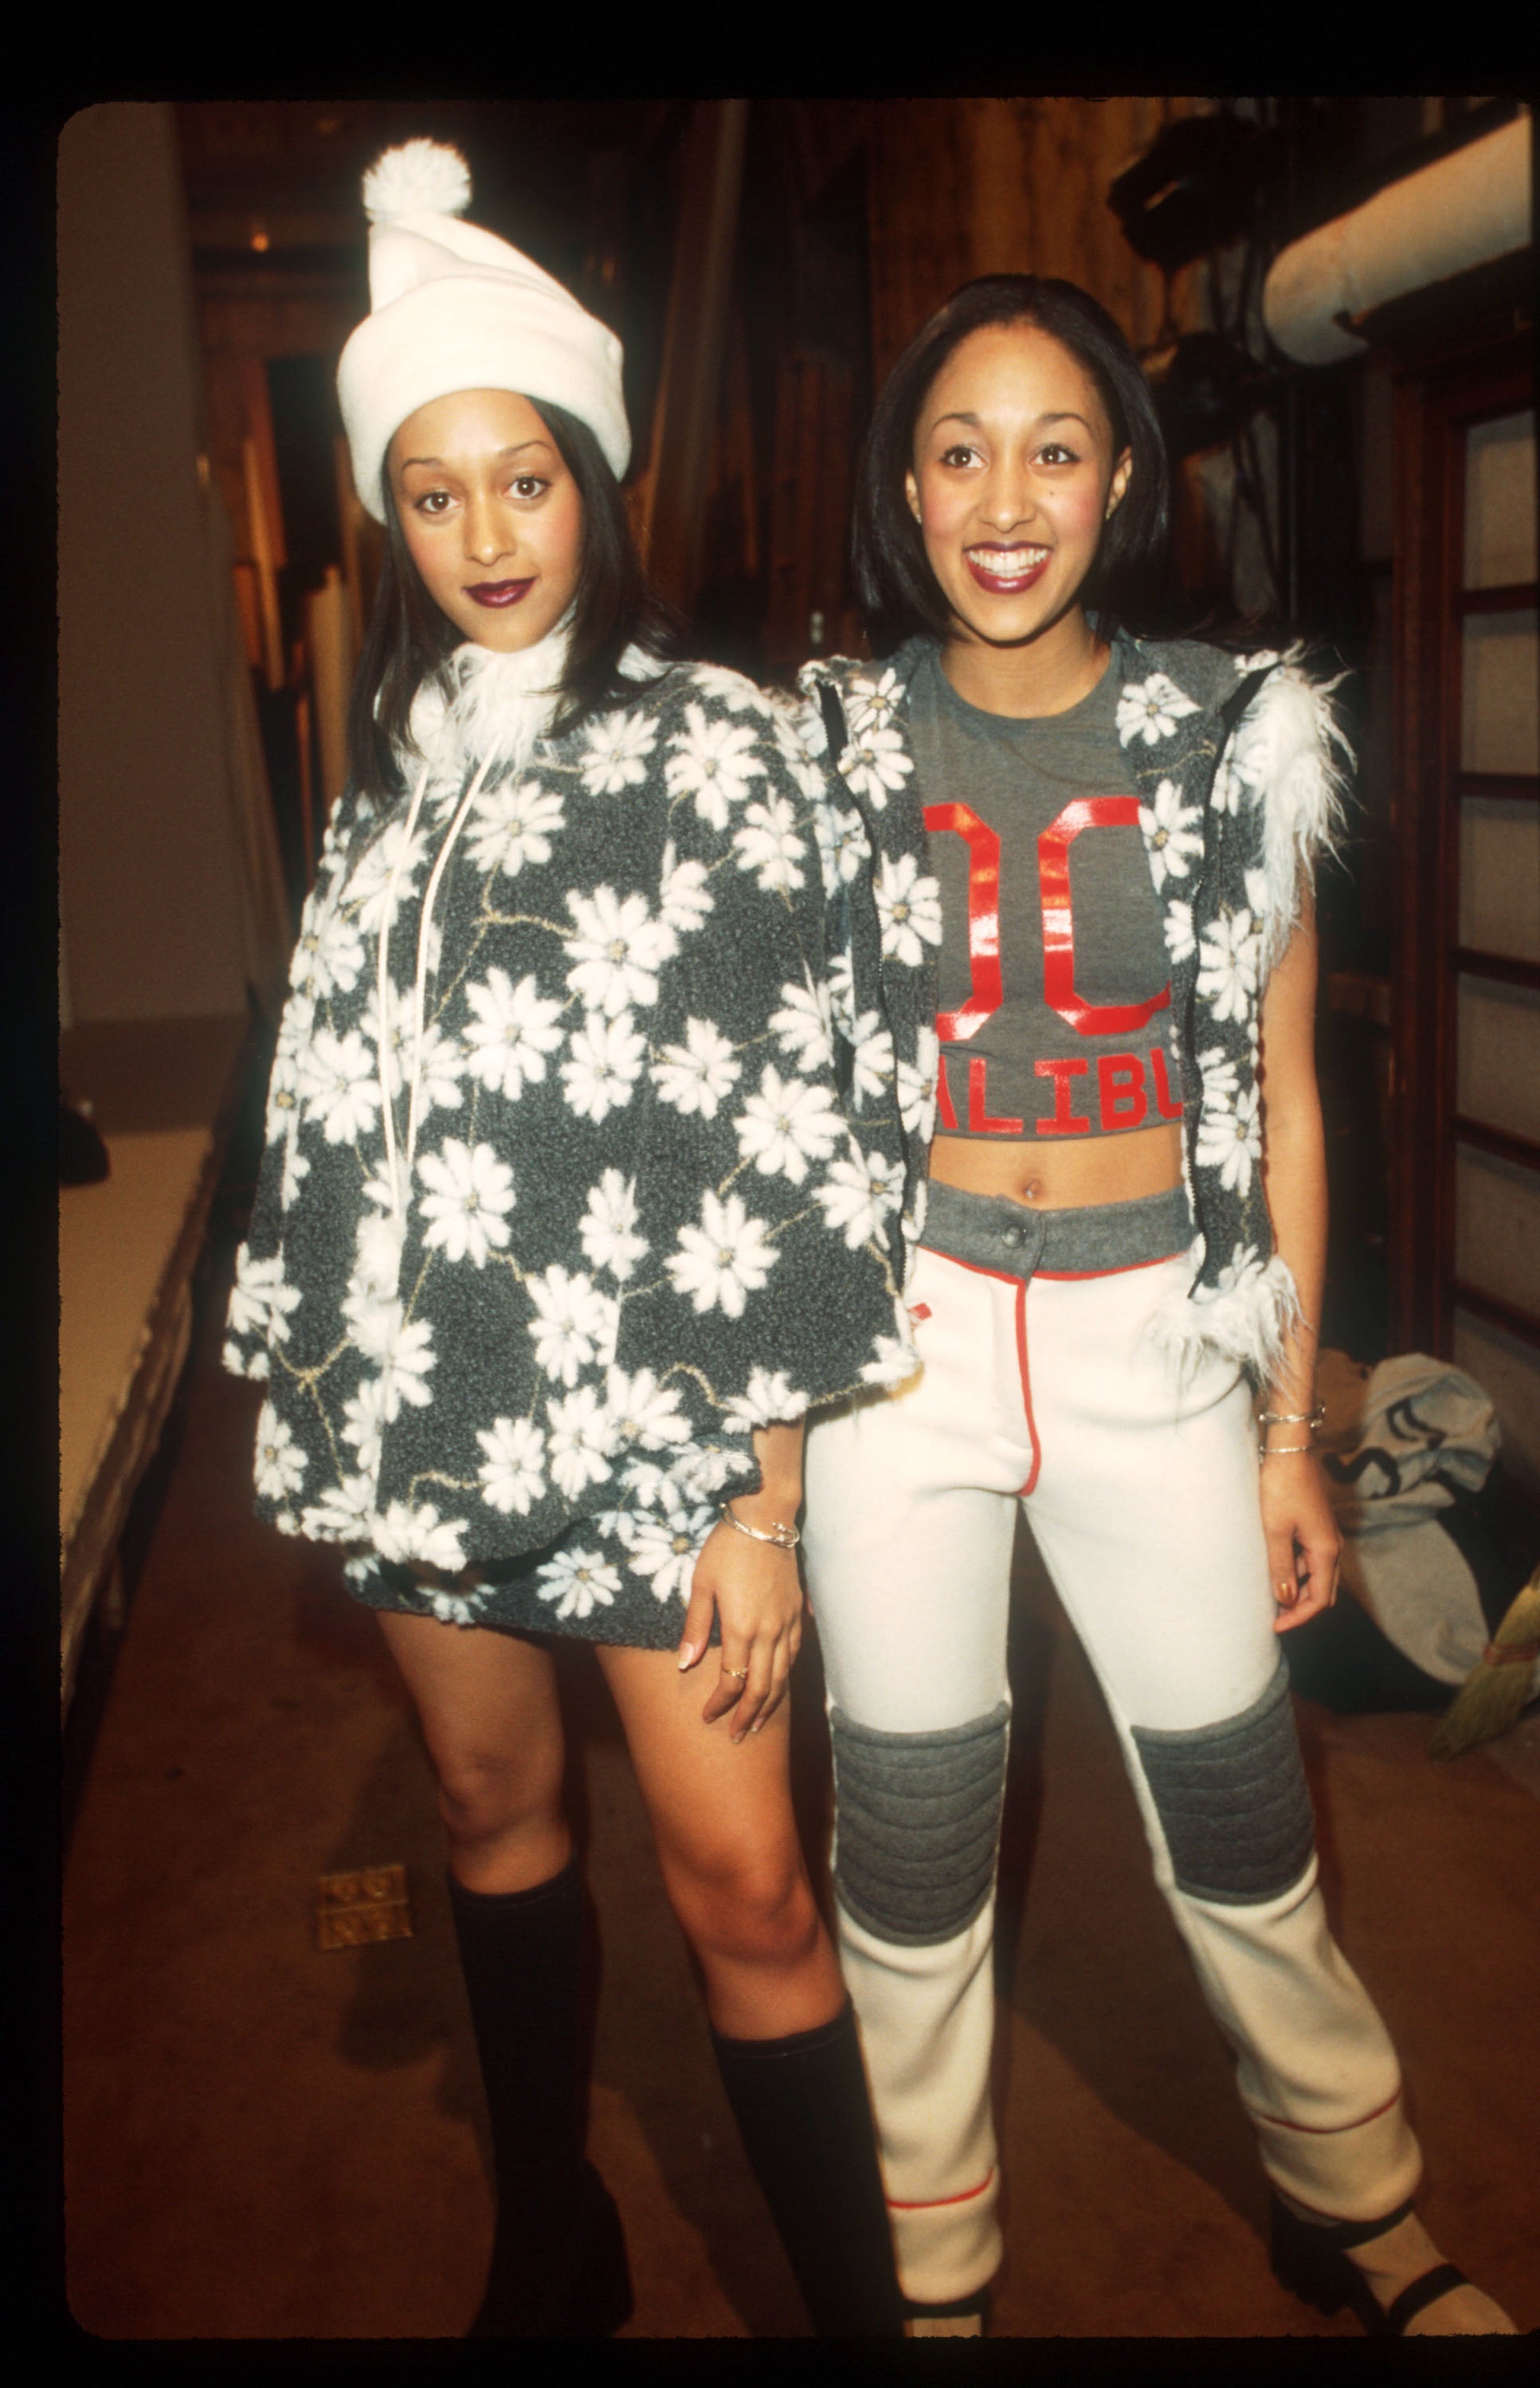 Happy Birthday, Tia and Tamera! Proof the Flawless Duo has Been Slaying Side-by-Side for Years
